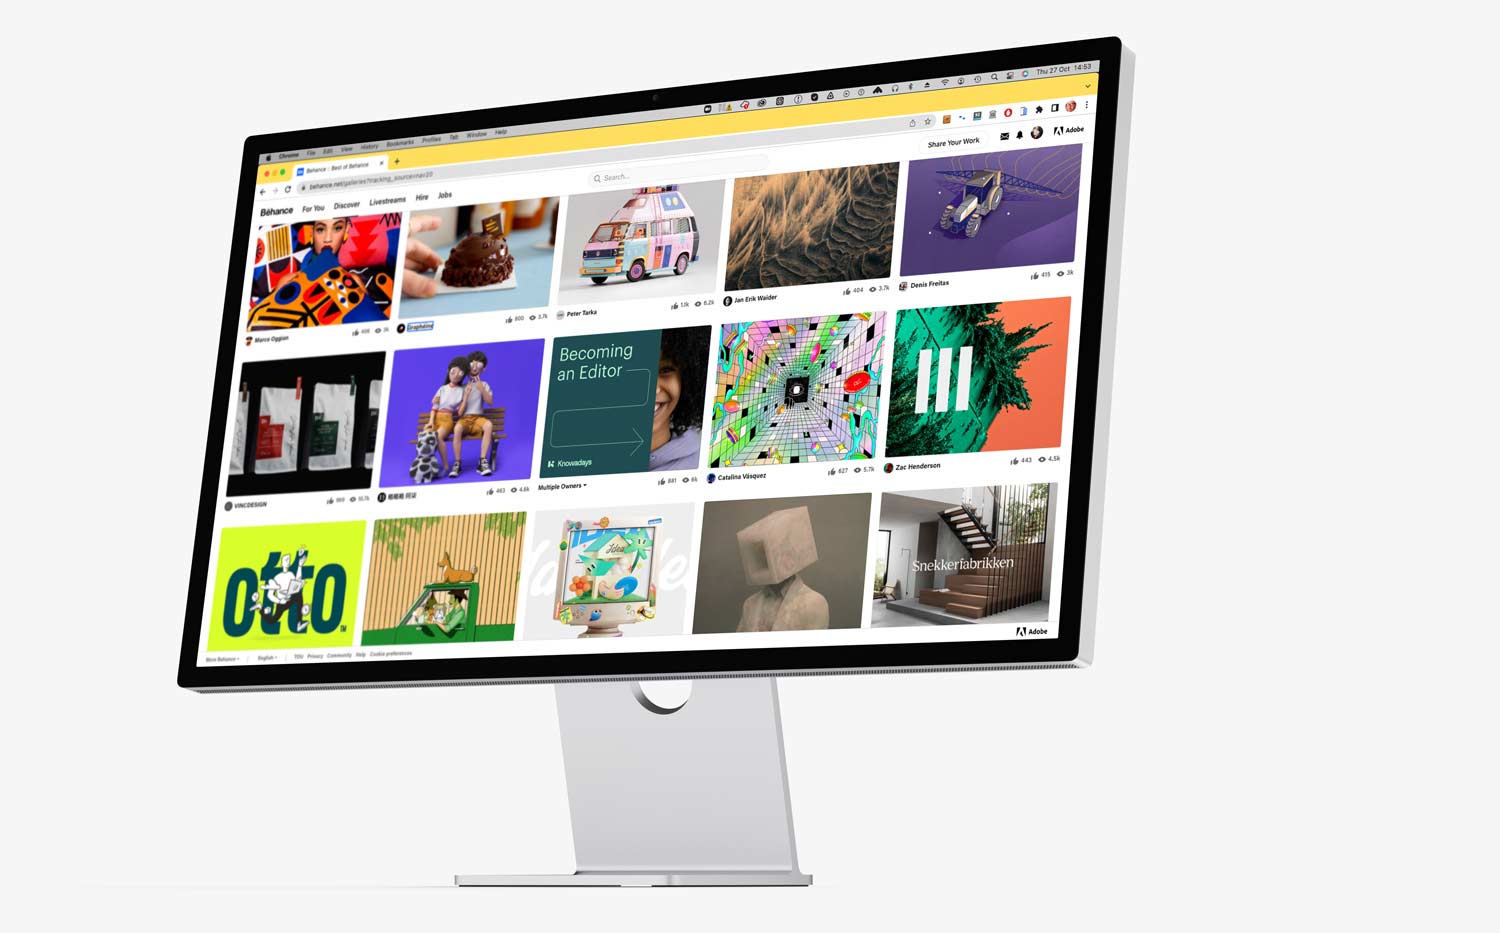 The behance website shown on a display screen